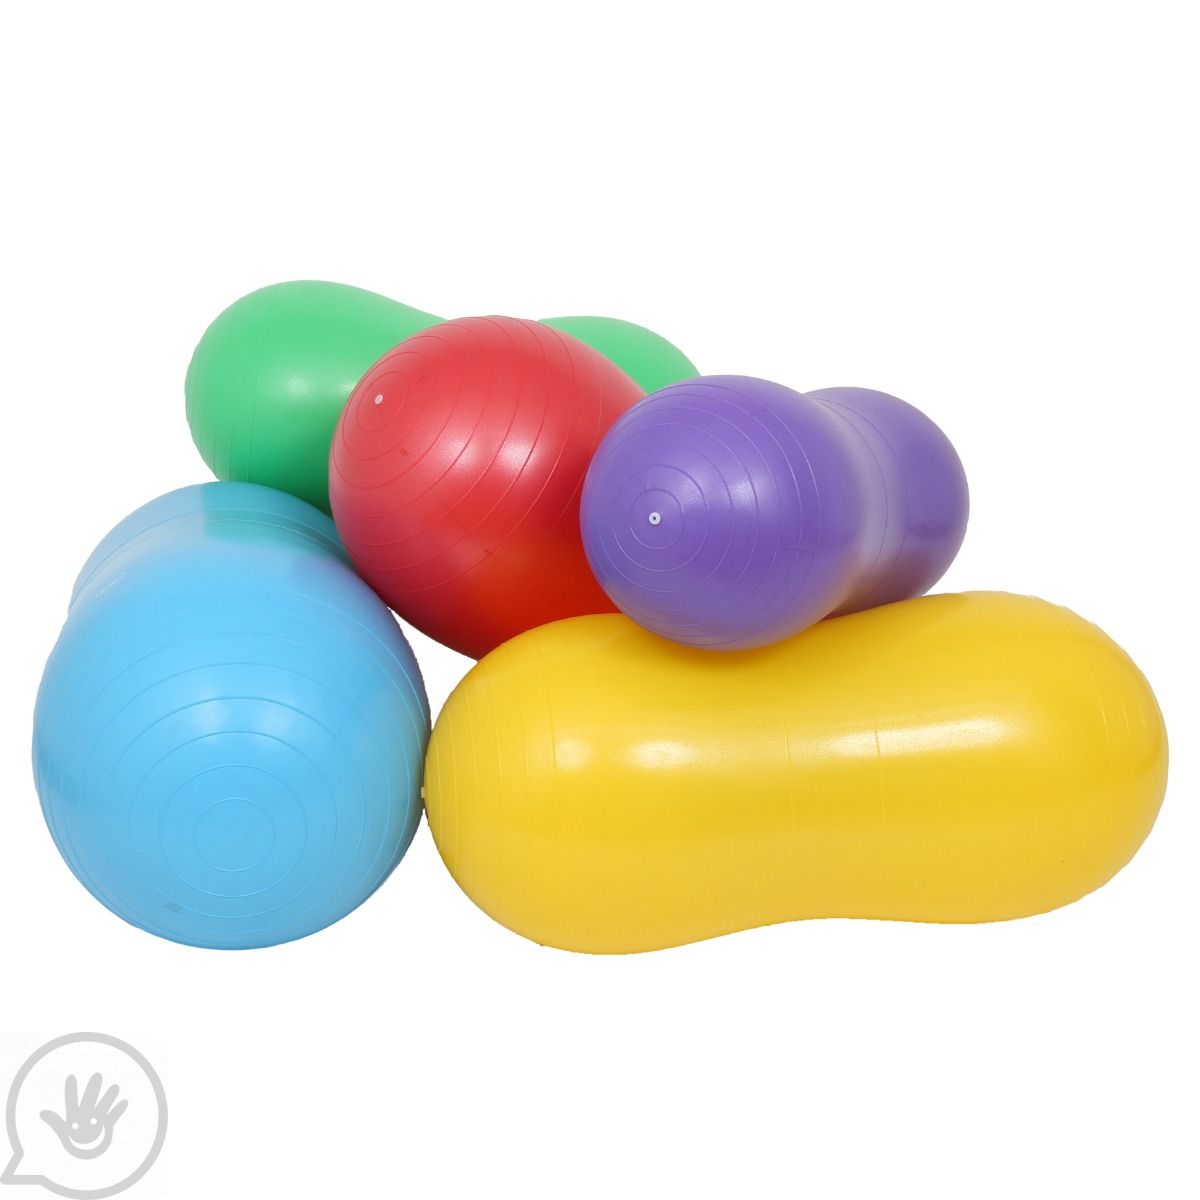 Peanut　for　Ball　Exercise　Chair　Balance　Stability　Ball　Chair　Specials　Needs　Children